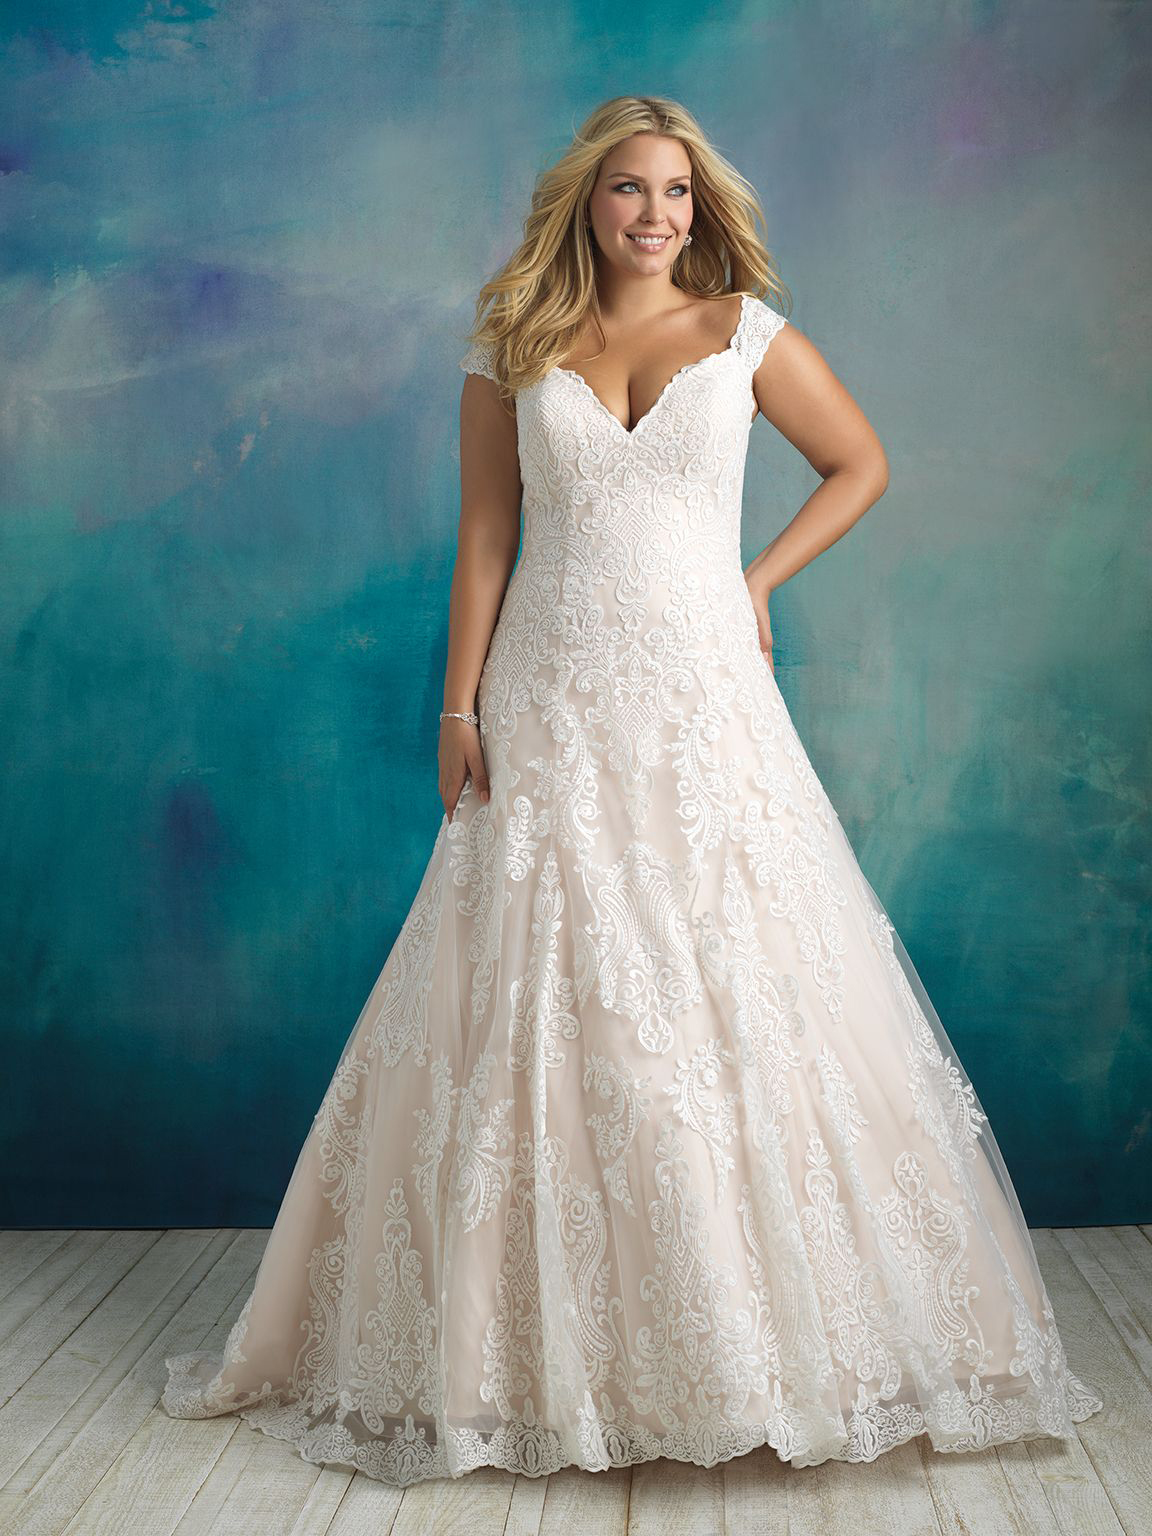 Plus-size A-line wedding dress with cap sleeves by Allure Bridals